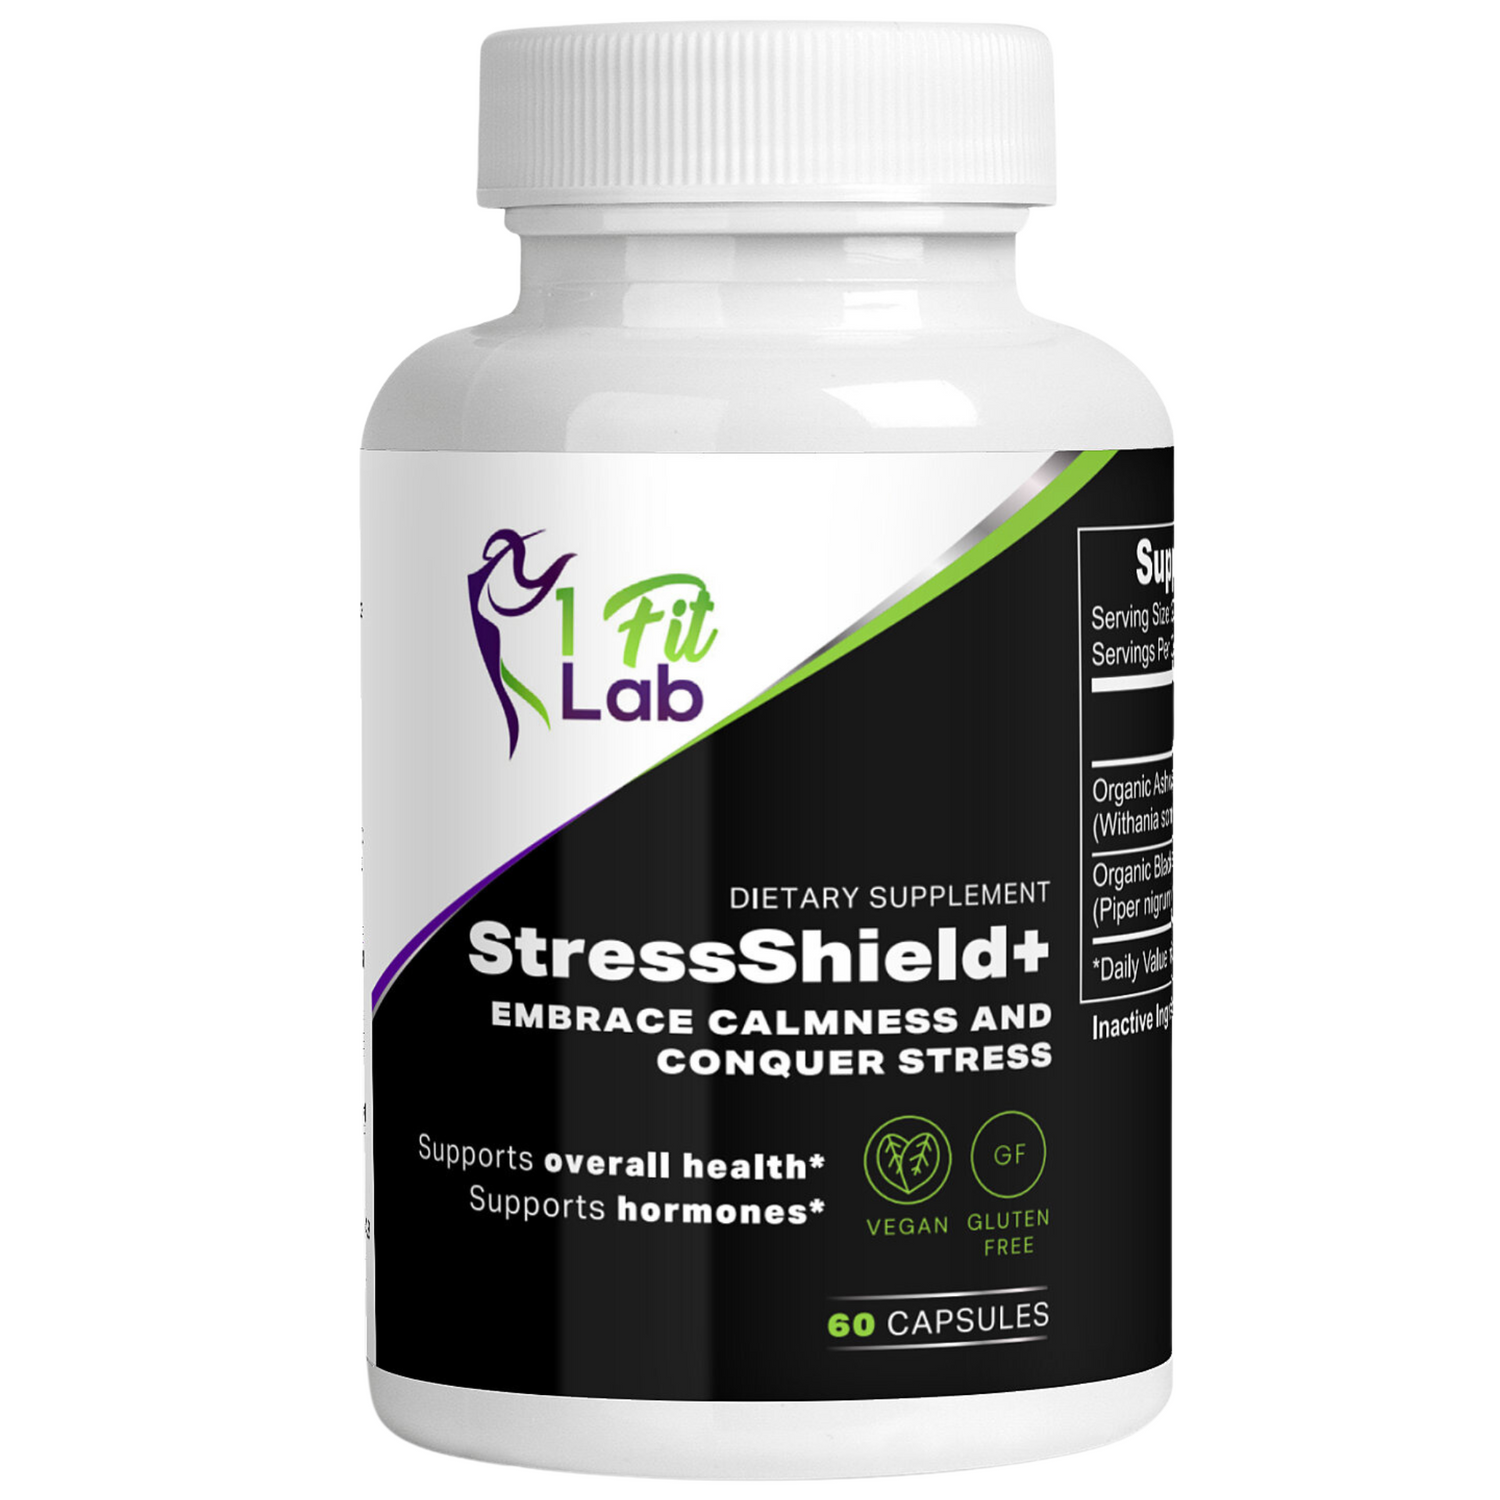 Bottle of StressShield+ Organic Ashwagandha supplement for stress relief and balance